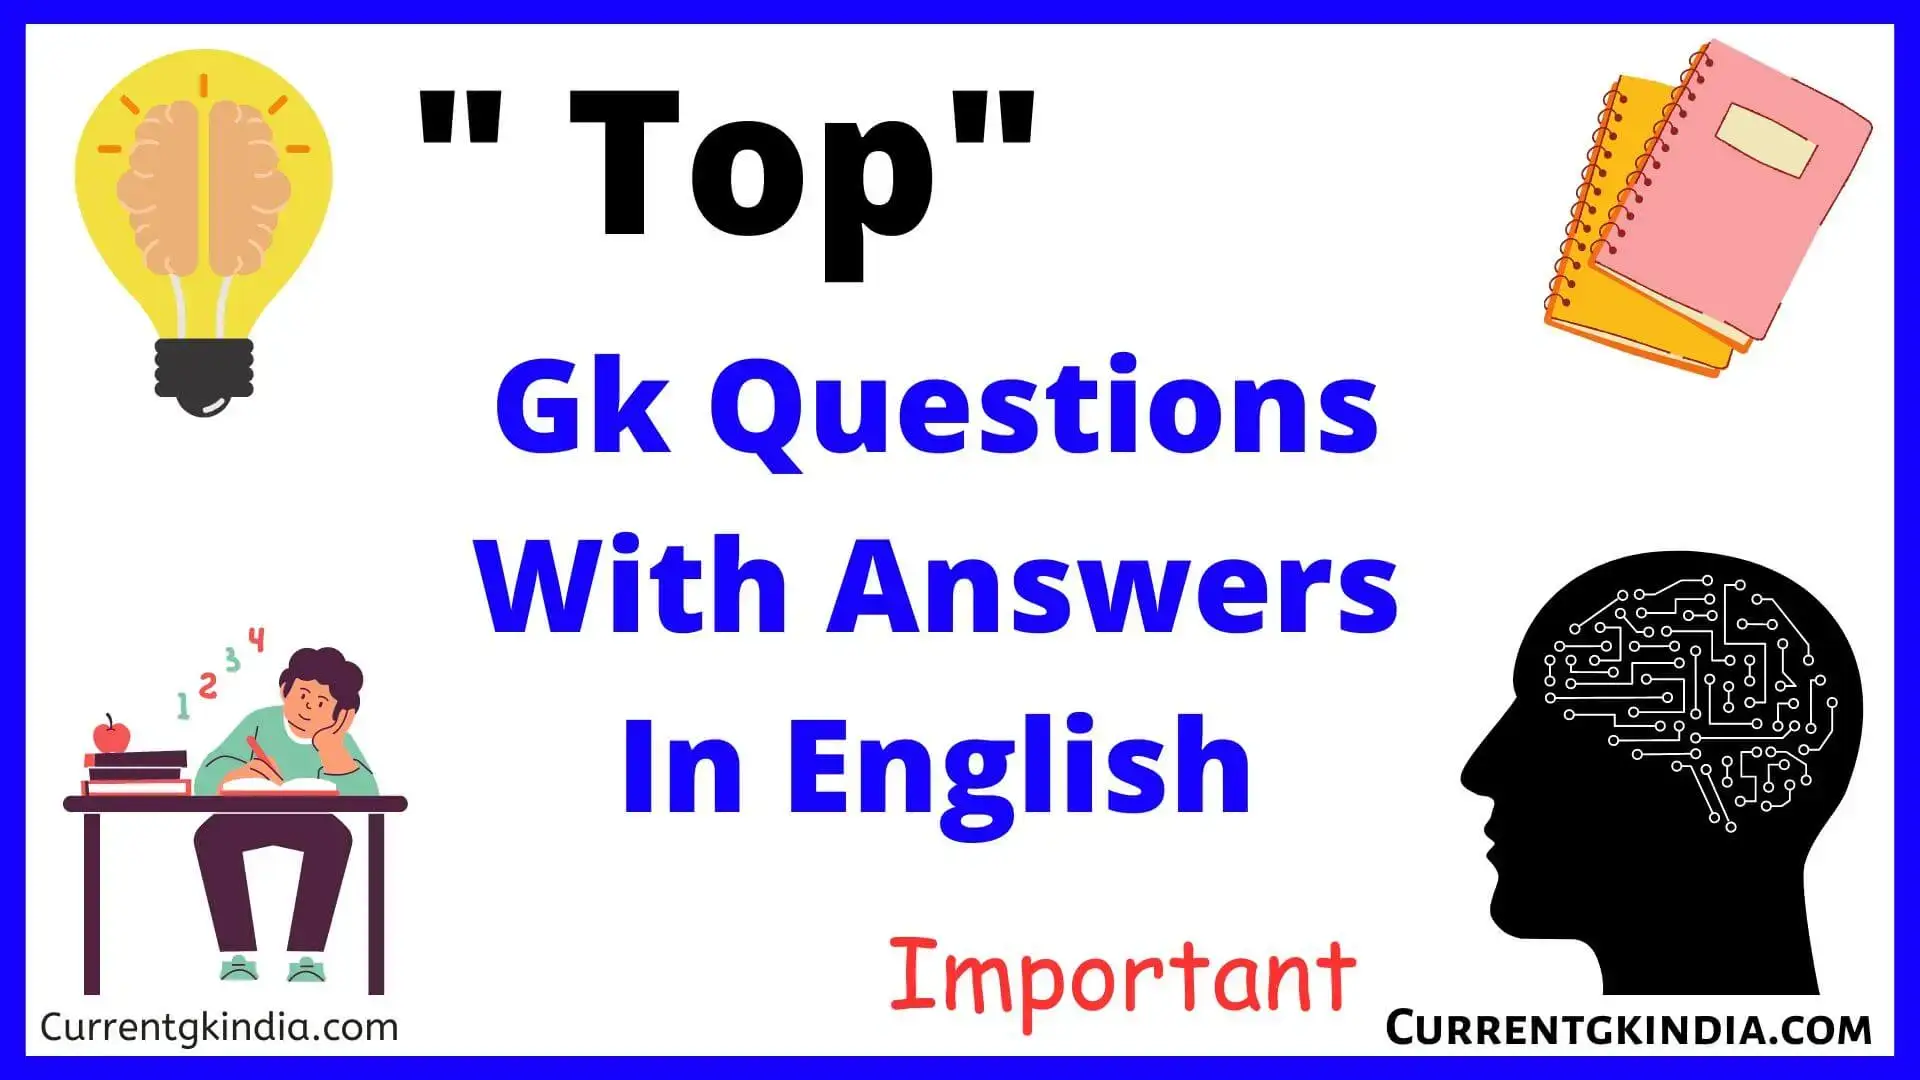 Gk Questions With Answers In English.webp